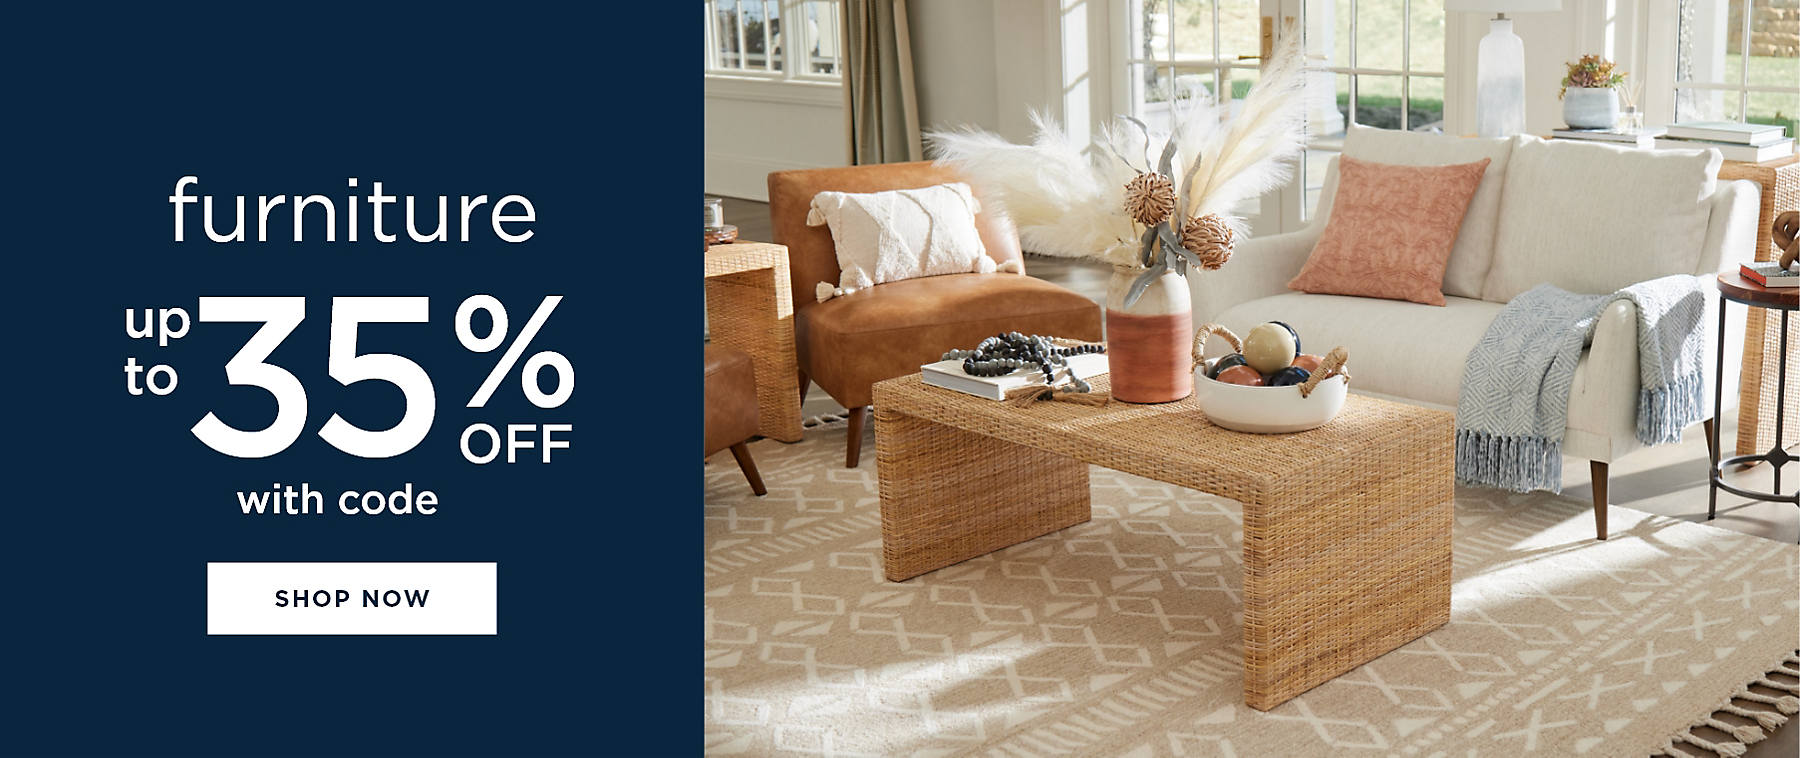 furniture up to 35% off with code shop now